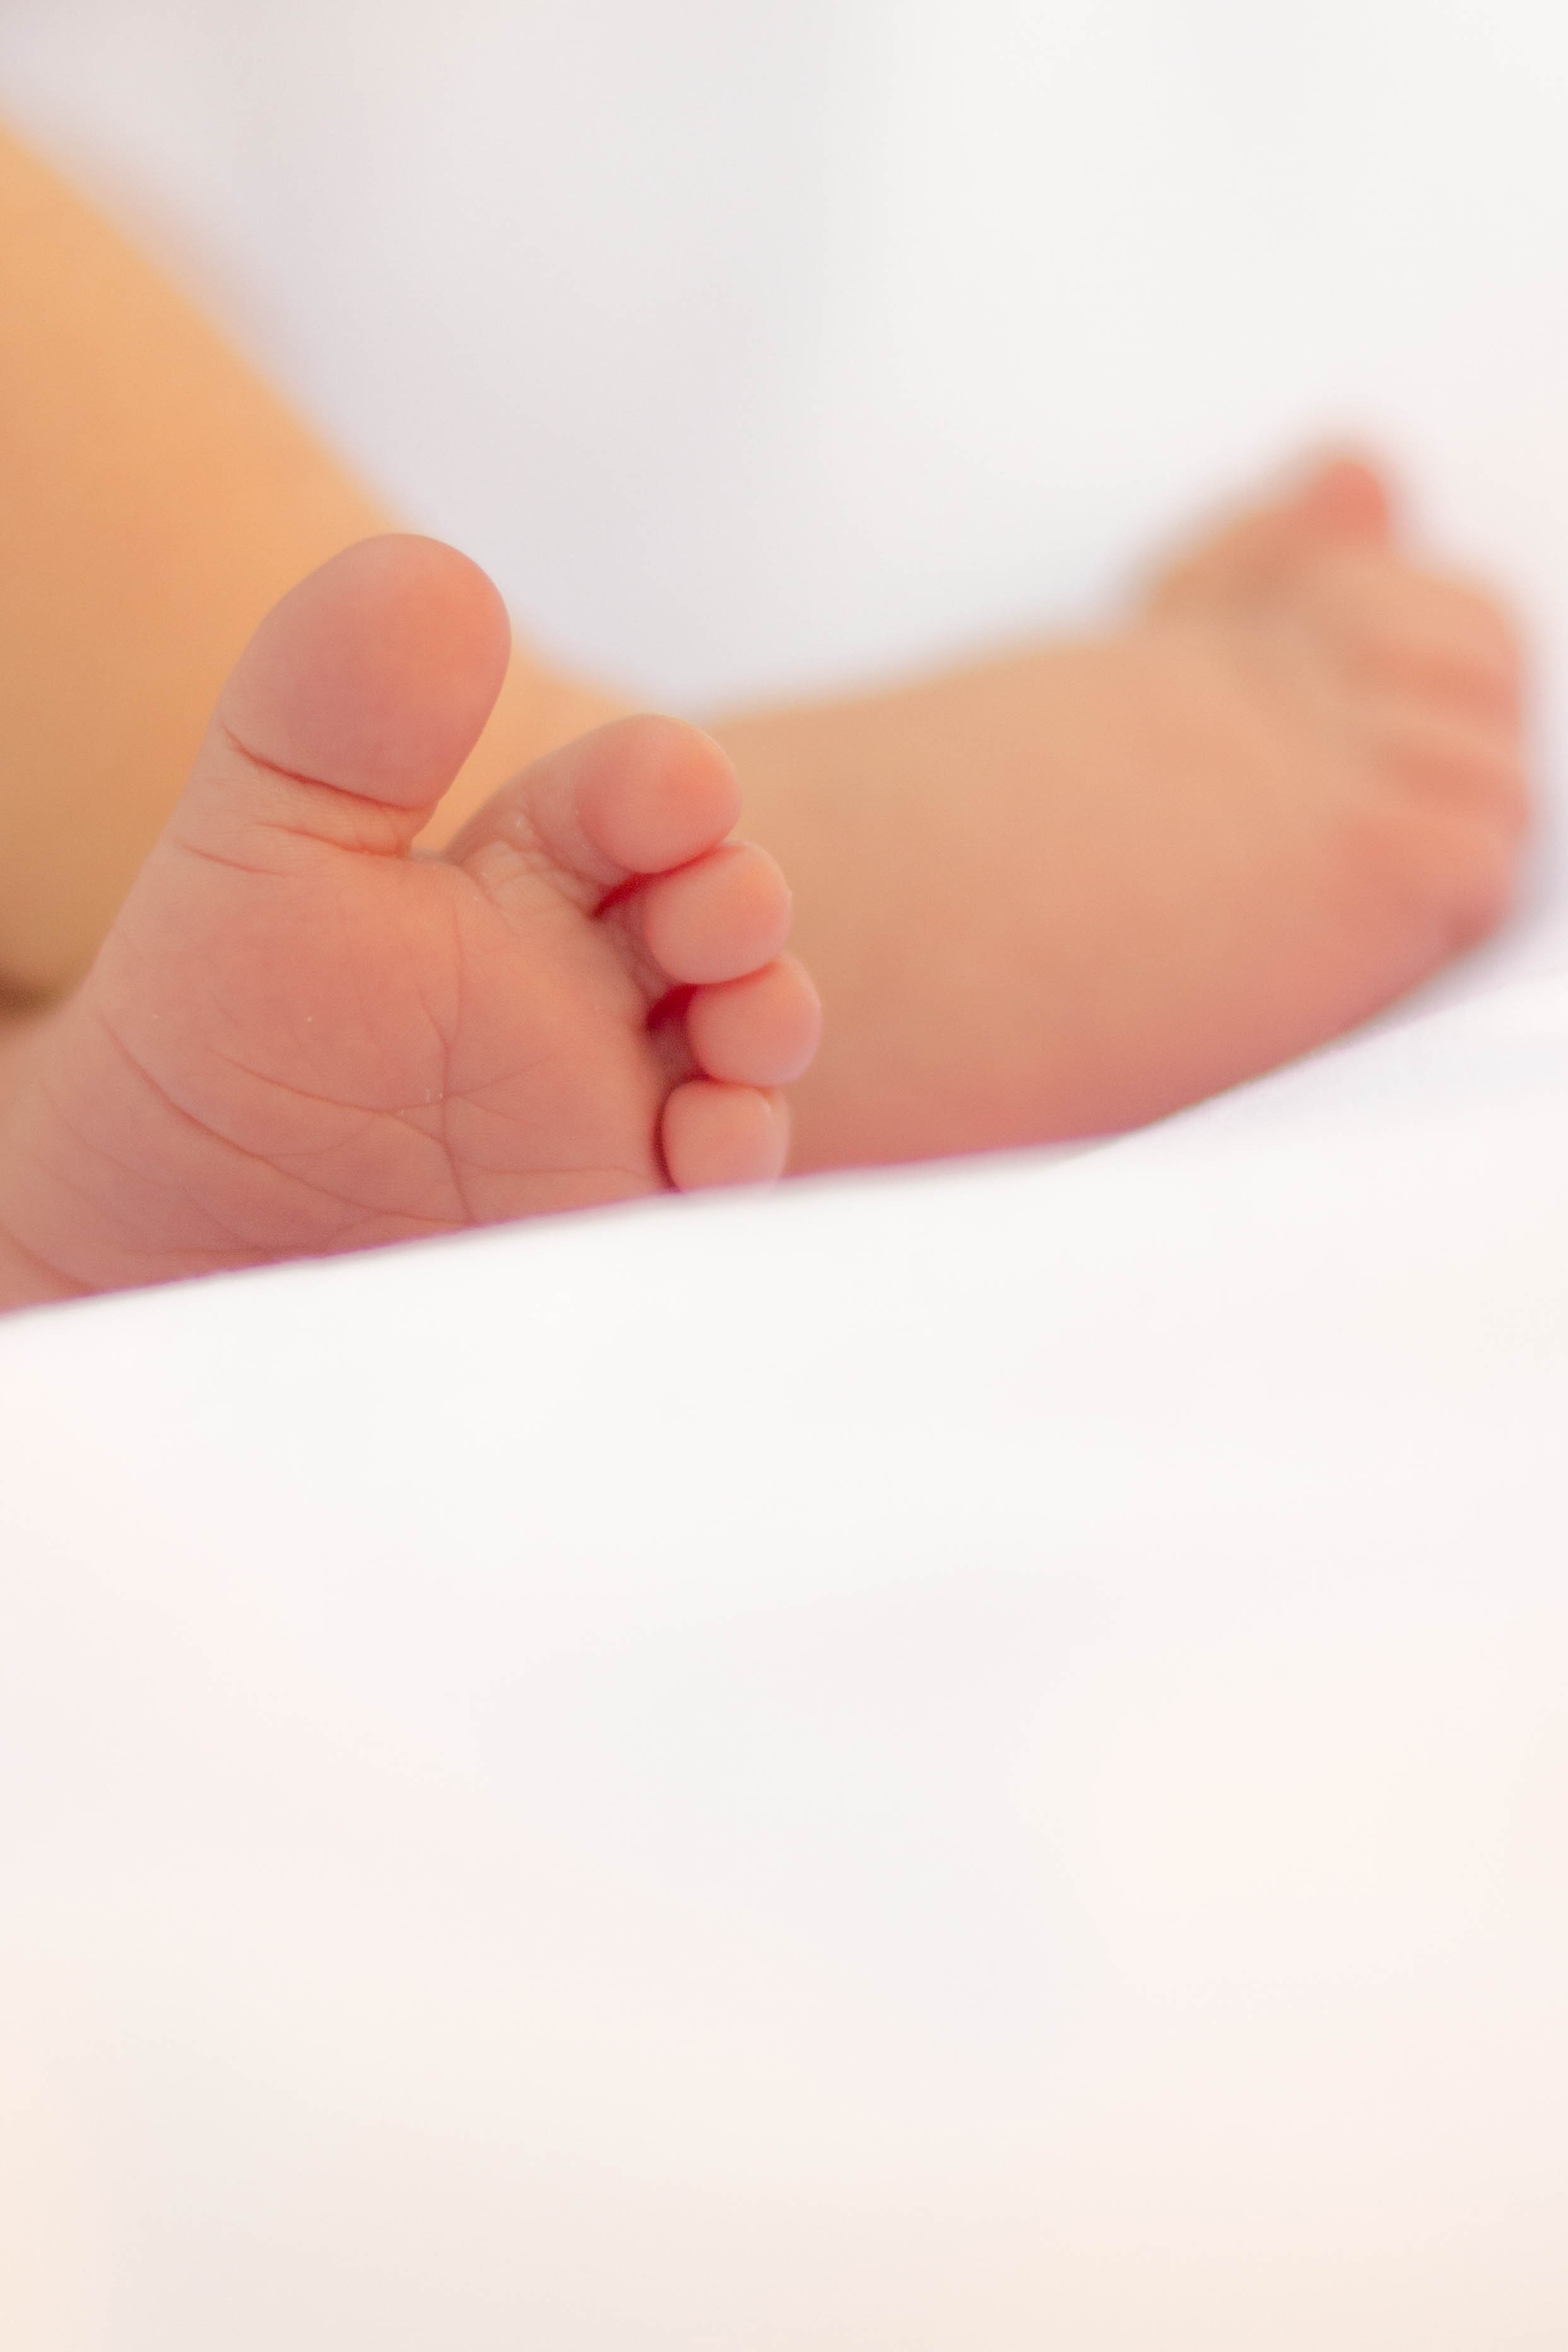 photo showing baby's feet on white textile